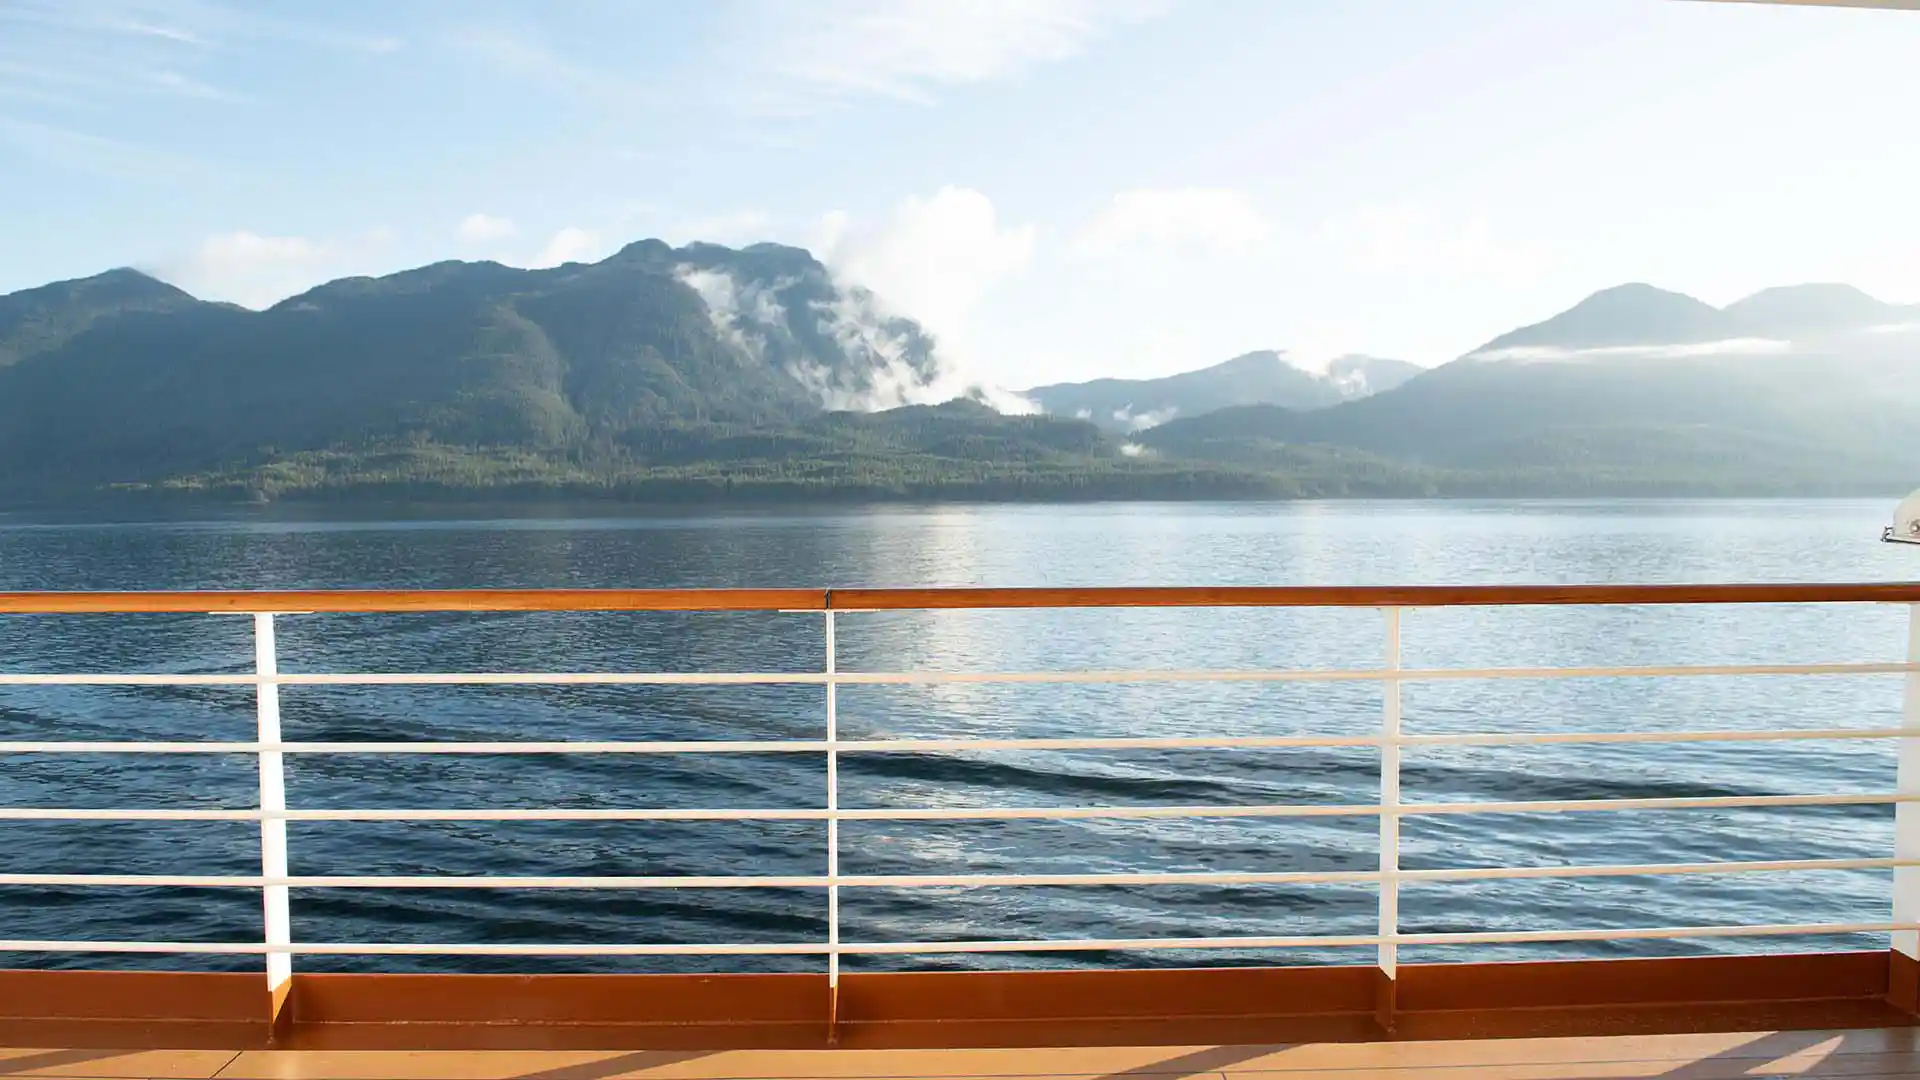 Post: 10 Tips to Help Plan Your Cruise Vacation